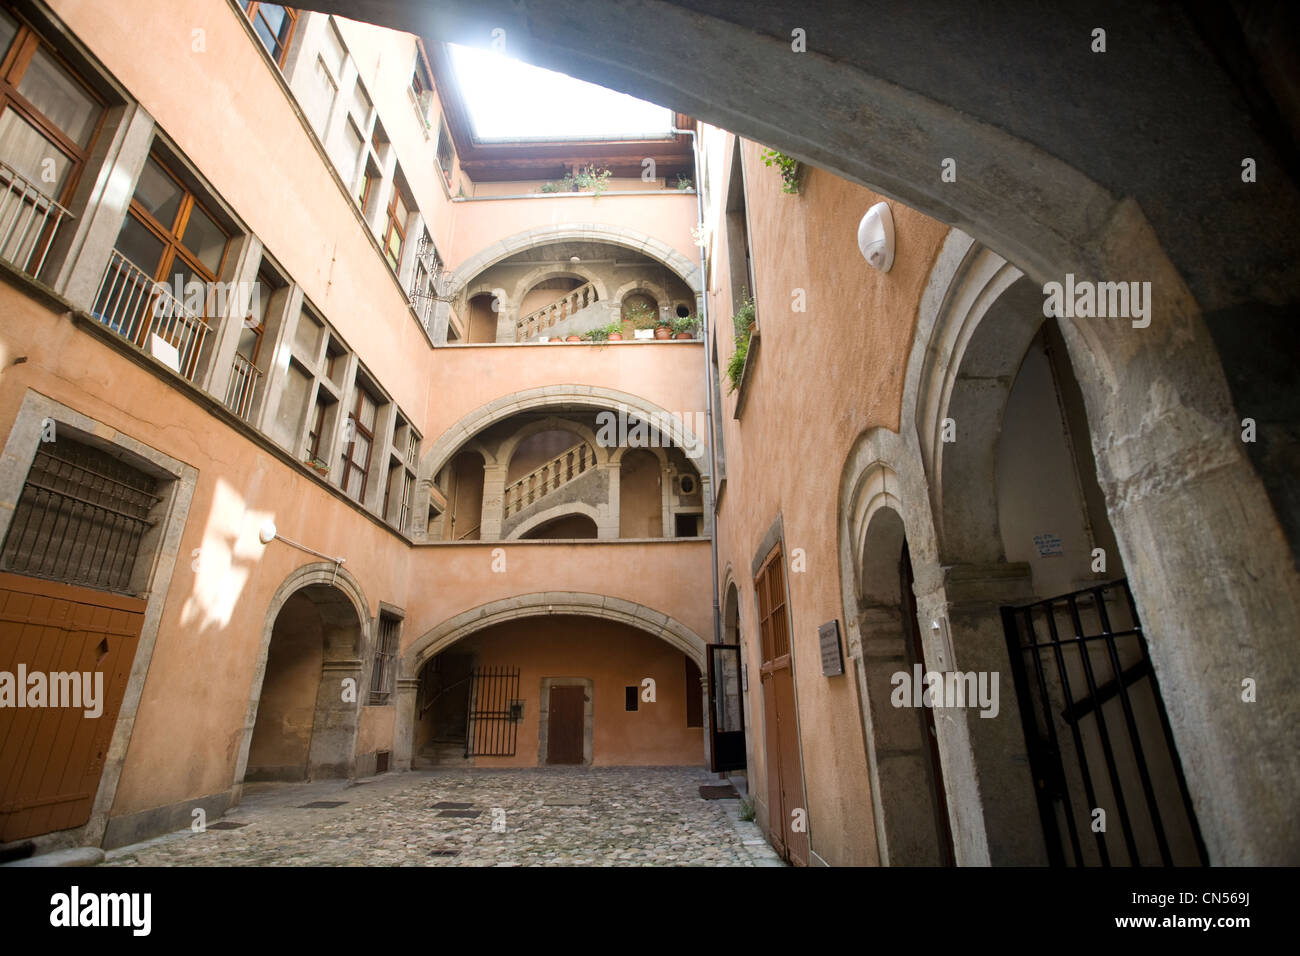 France, Isere, Grenoble, courtyard of the 17th century old Vaucanson Mansion house in Rue Chenoise Stock Photo